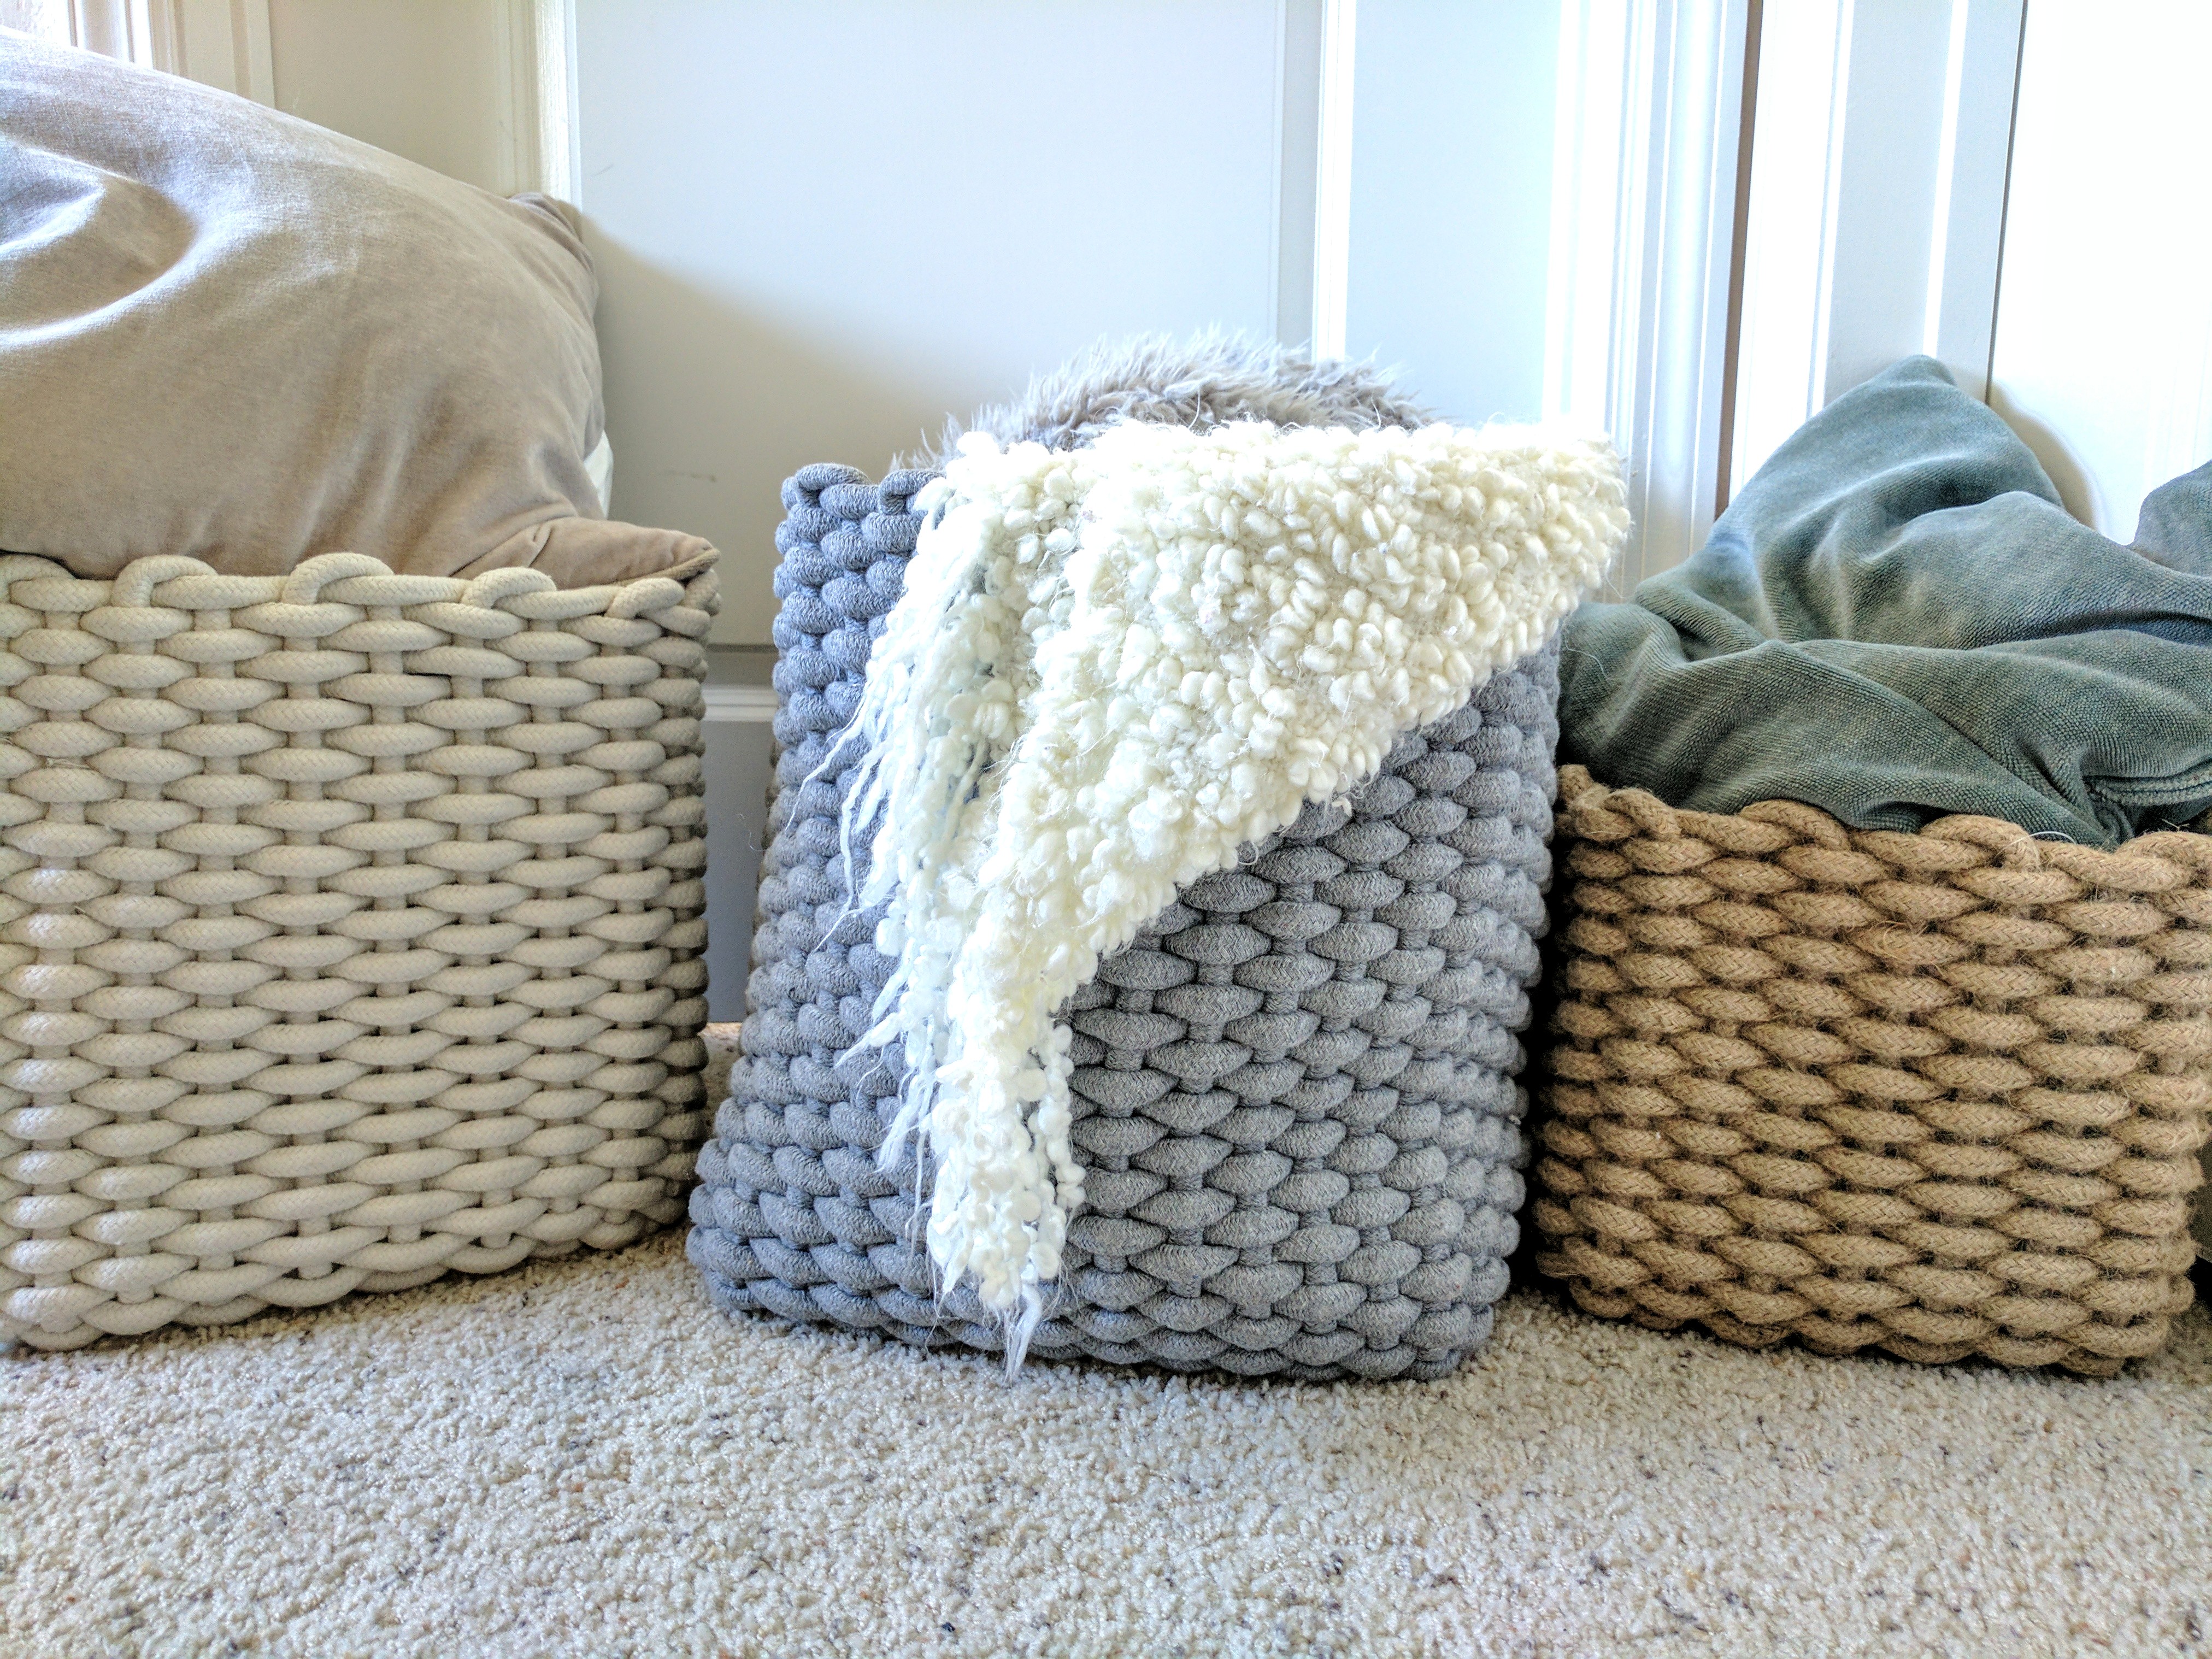 Overstock rope baskets